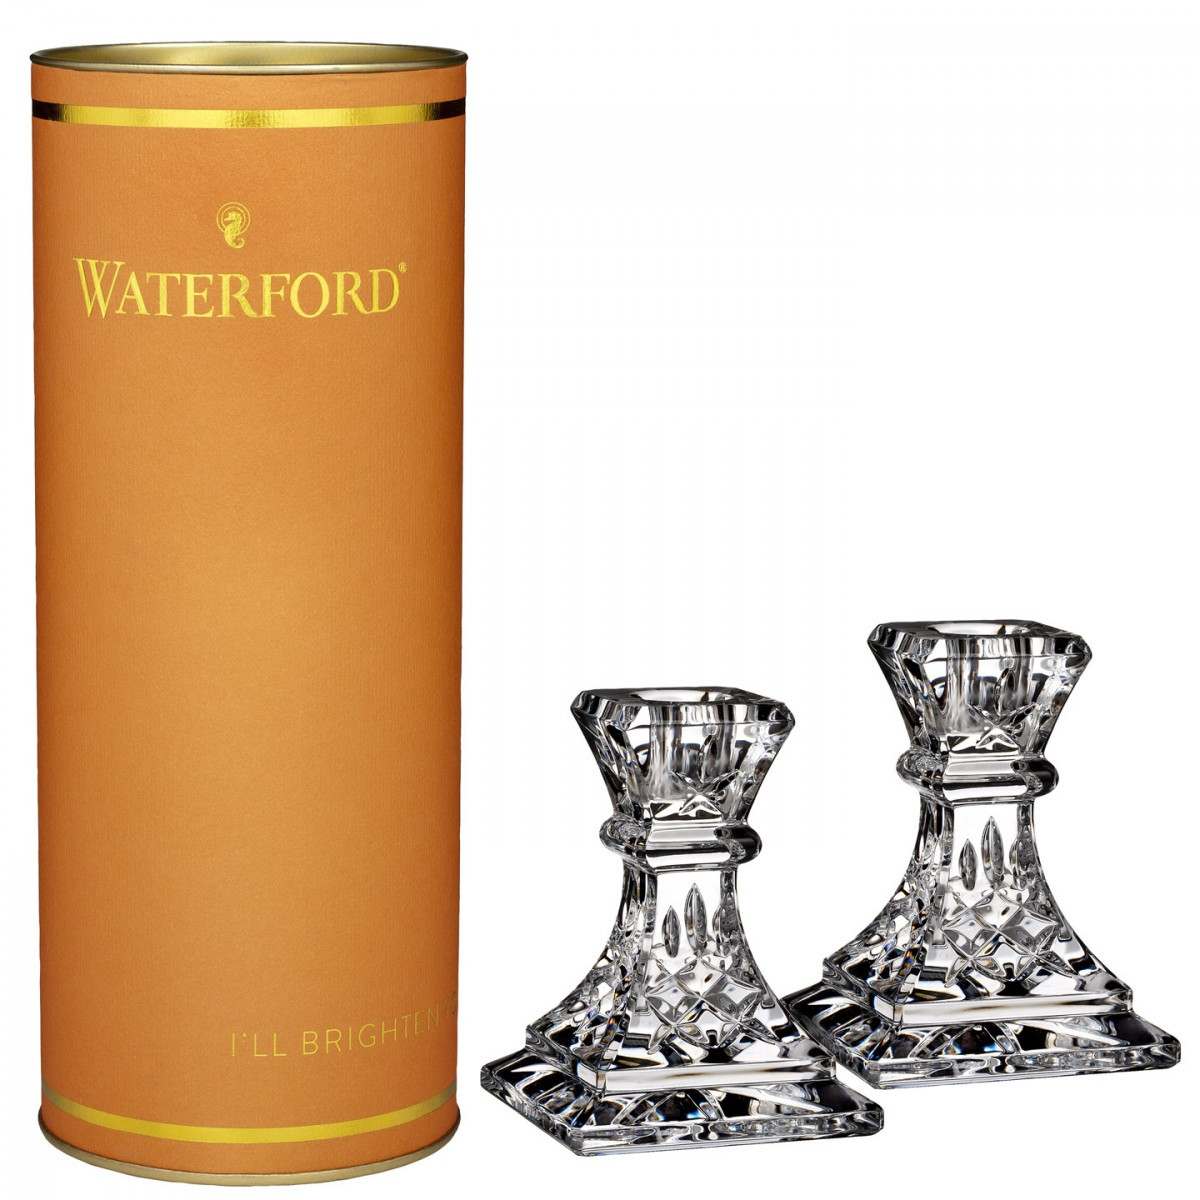 30 Spectacular Waterford Honey Bud Vase 2024 free download waterford honey bud vase of giftology lismore 4in candlestick pair waterford us throughout giftology lismore 4in candlestick pair